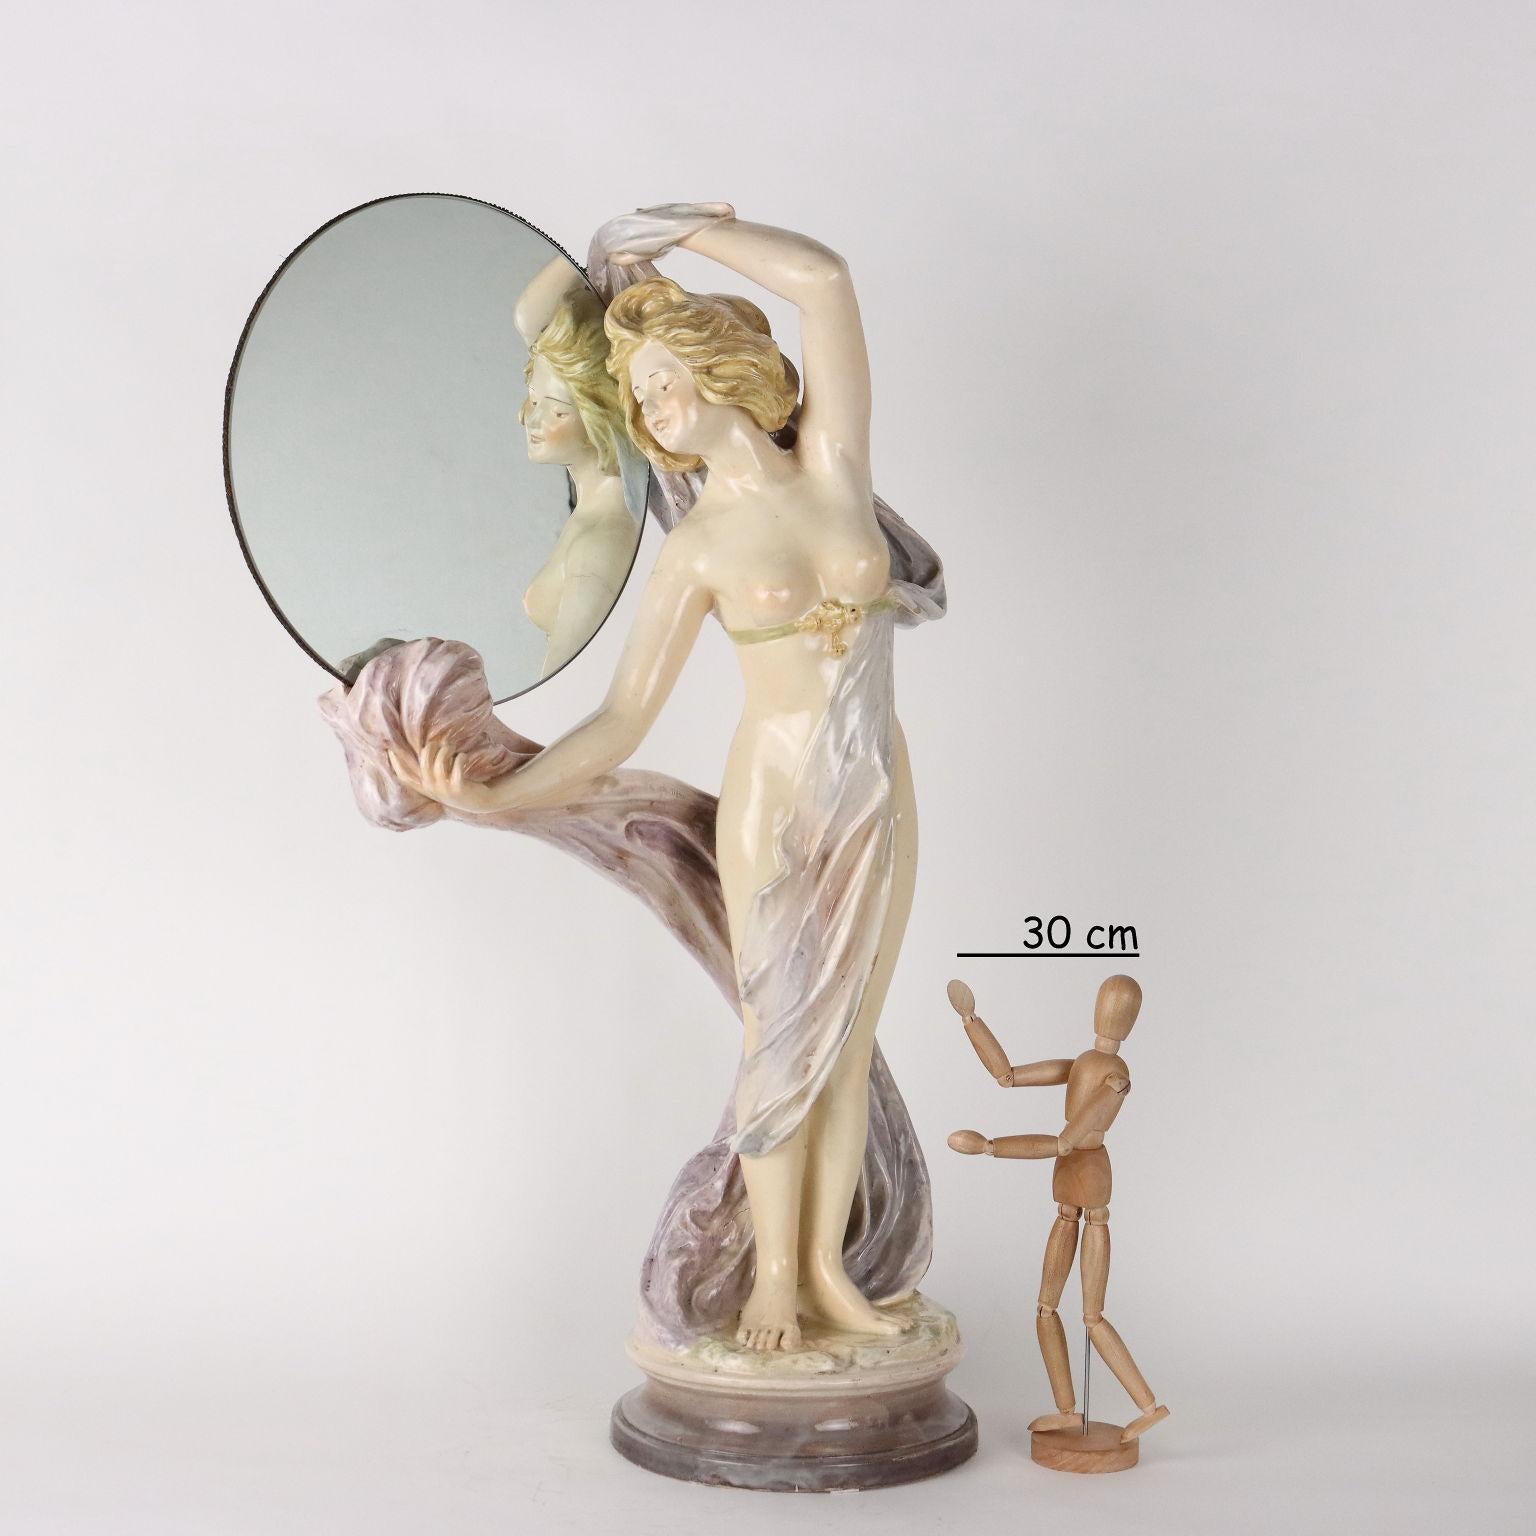 Glazed ceramic sculpture in soft colors depicting Venus. The statue holds a circular mirror and has a hardly legible manufacturing mark under the base.